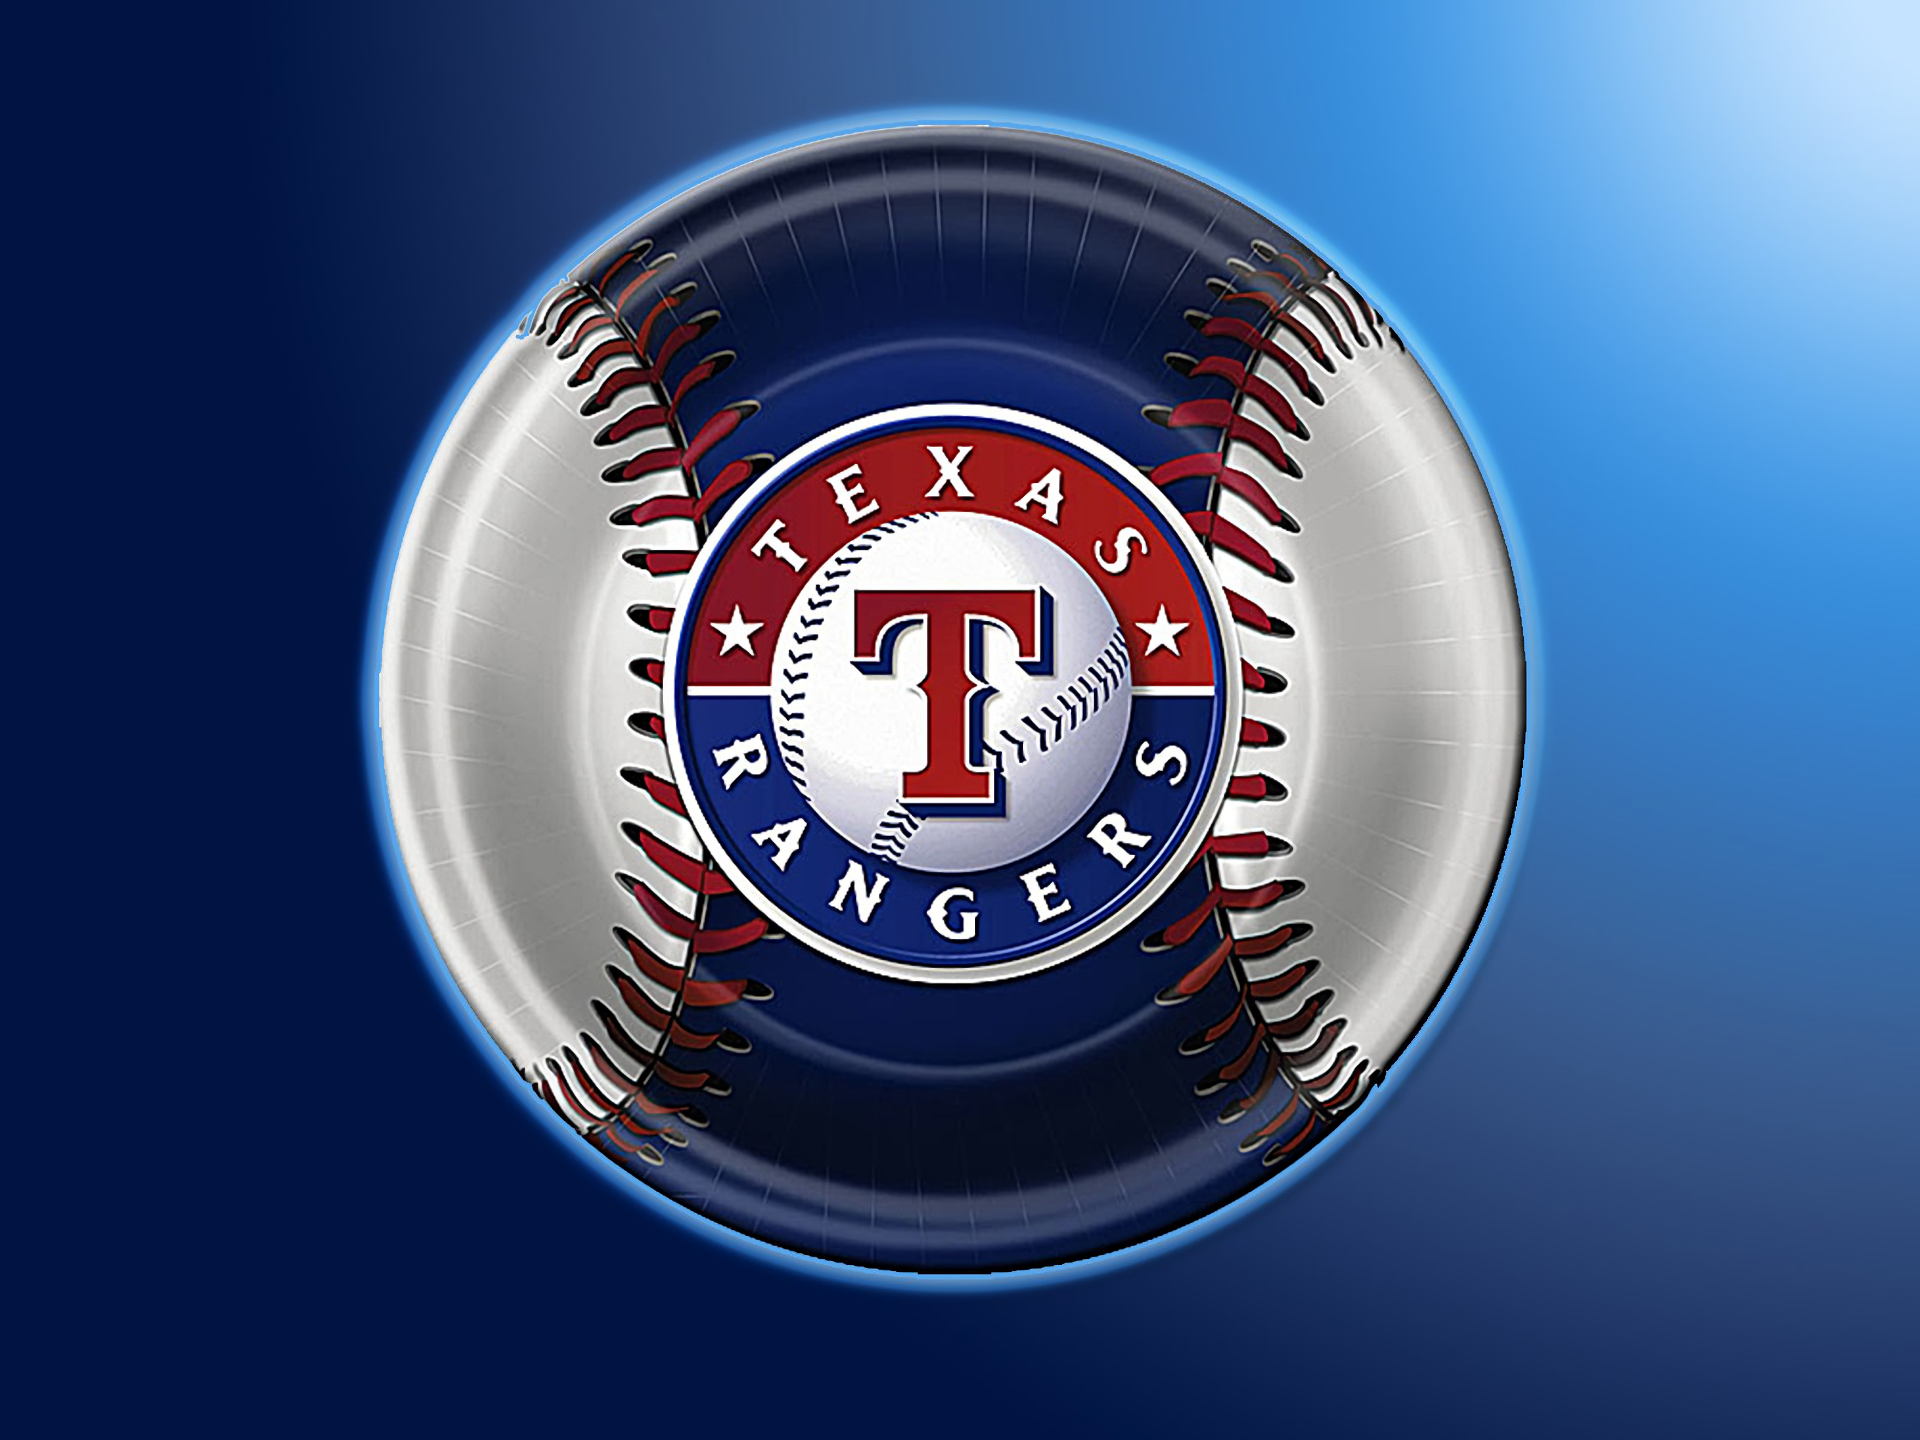 HD desktop wallpaper featuring the Texas Rangers logo with a stylized baseball and blue background.